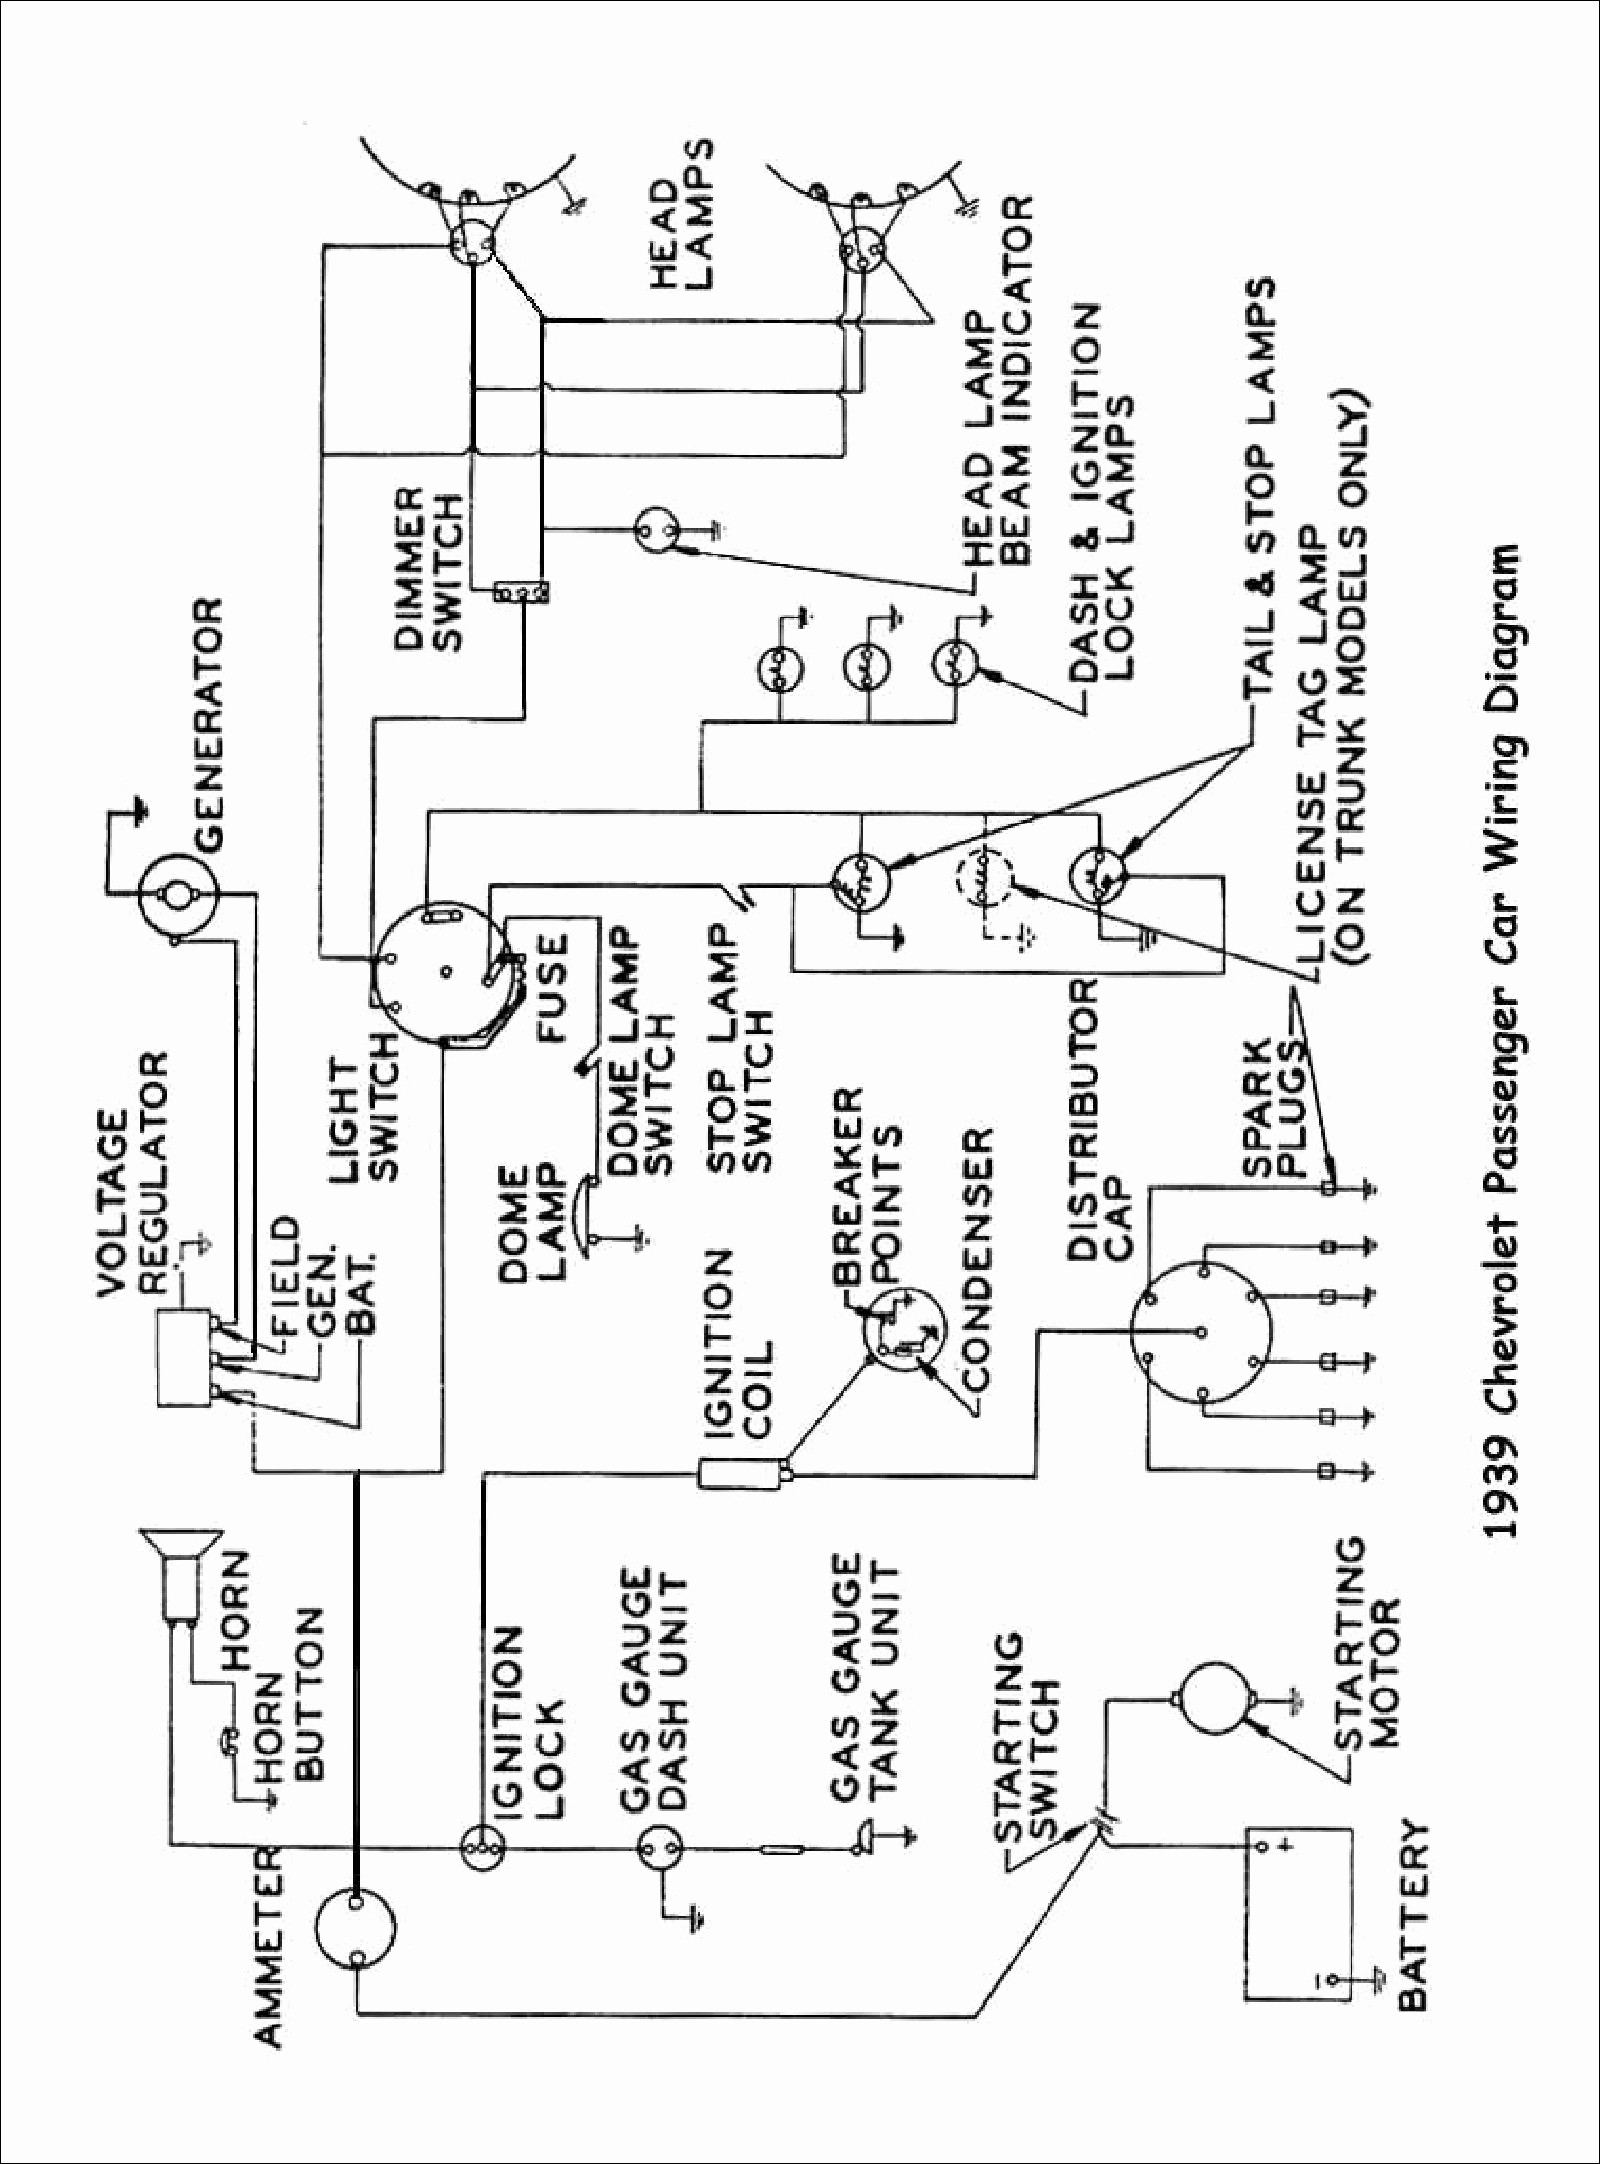 Harley Ignition Switch Wiring Diagram | Switch Wiring Diagram Free - Harley Ignition Switch Wiring Diagram